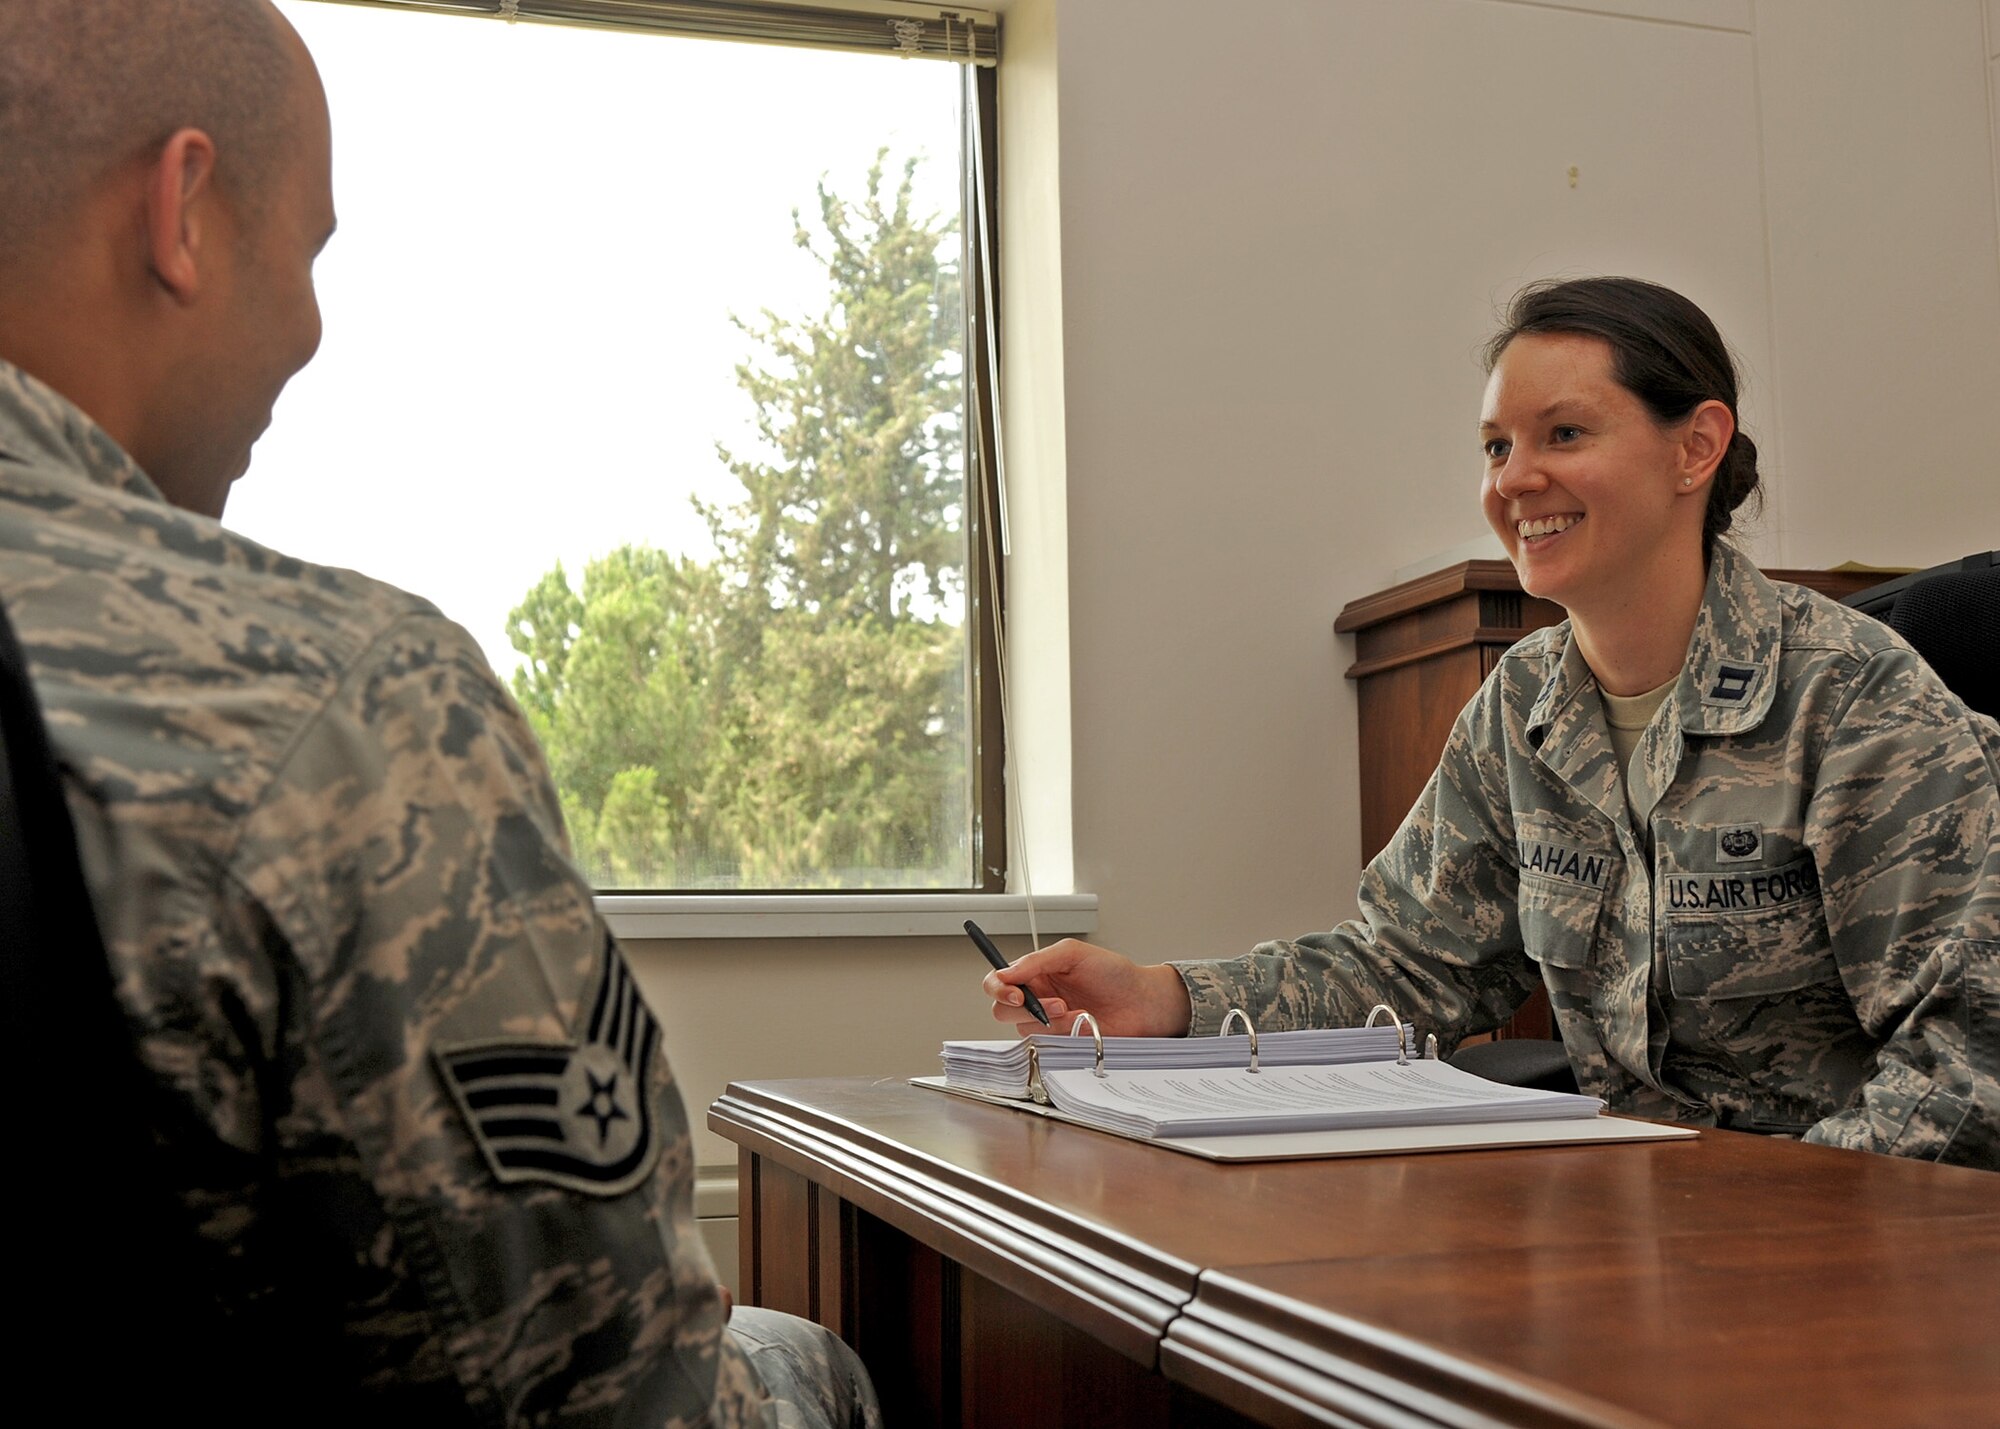 Capt. Lindsey Callahan, 39th Air Base Wing Legal Office chief of military justice, discusses the Uniformed Code of Military Justice with Staff Sgt. Jason Murphy, 39th Air Base Wing Legal Office Military Justice Paralegal, June 19, 2014, Incirlik Air Base, Turkey. The legal office here is available to assist with legal concerns, and offer legal guidance to service members and their dependents station at Incirlik AB. (U.S. Air Force photo by Staff Sgt. Veronica Pierce) 